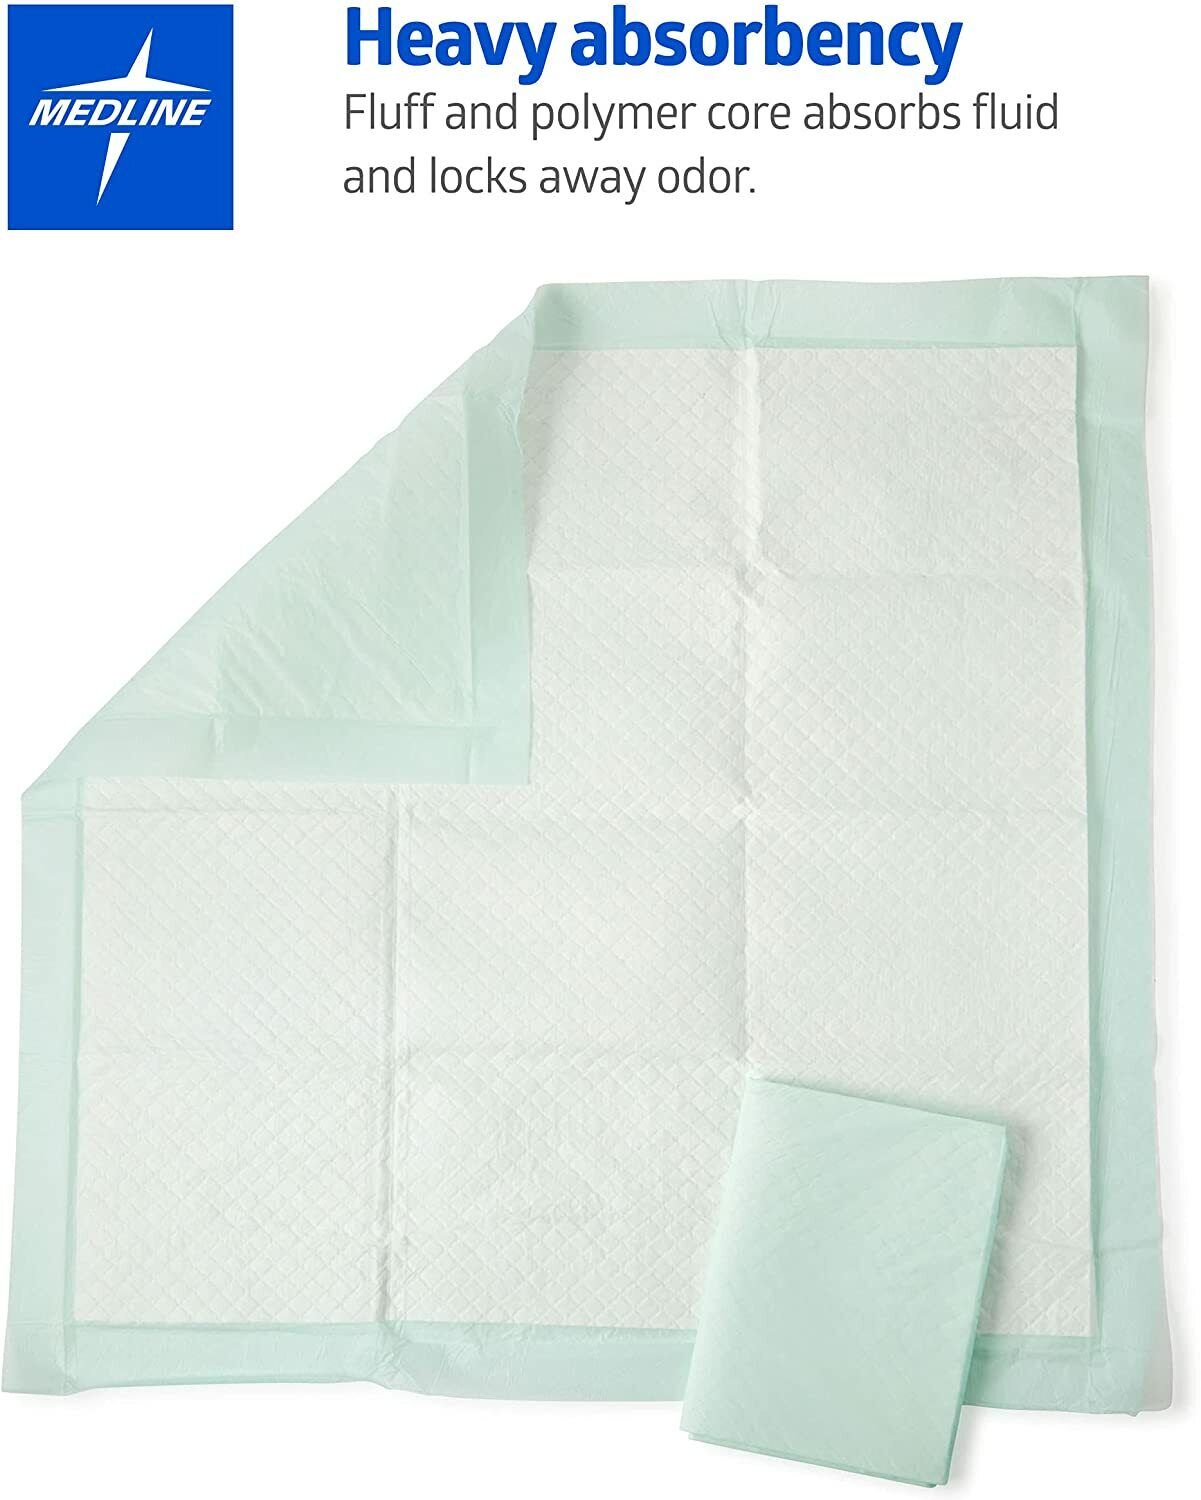 Medline Heavy Absorbency Incontinence Bed Pee Chux Underpads 36 x 36, 50 Pads